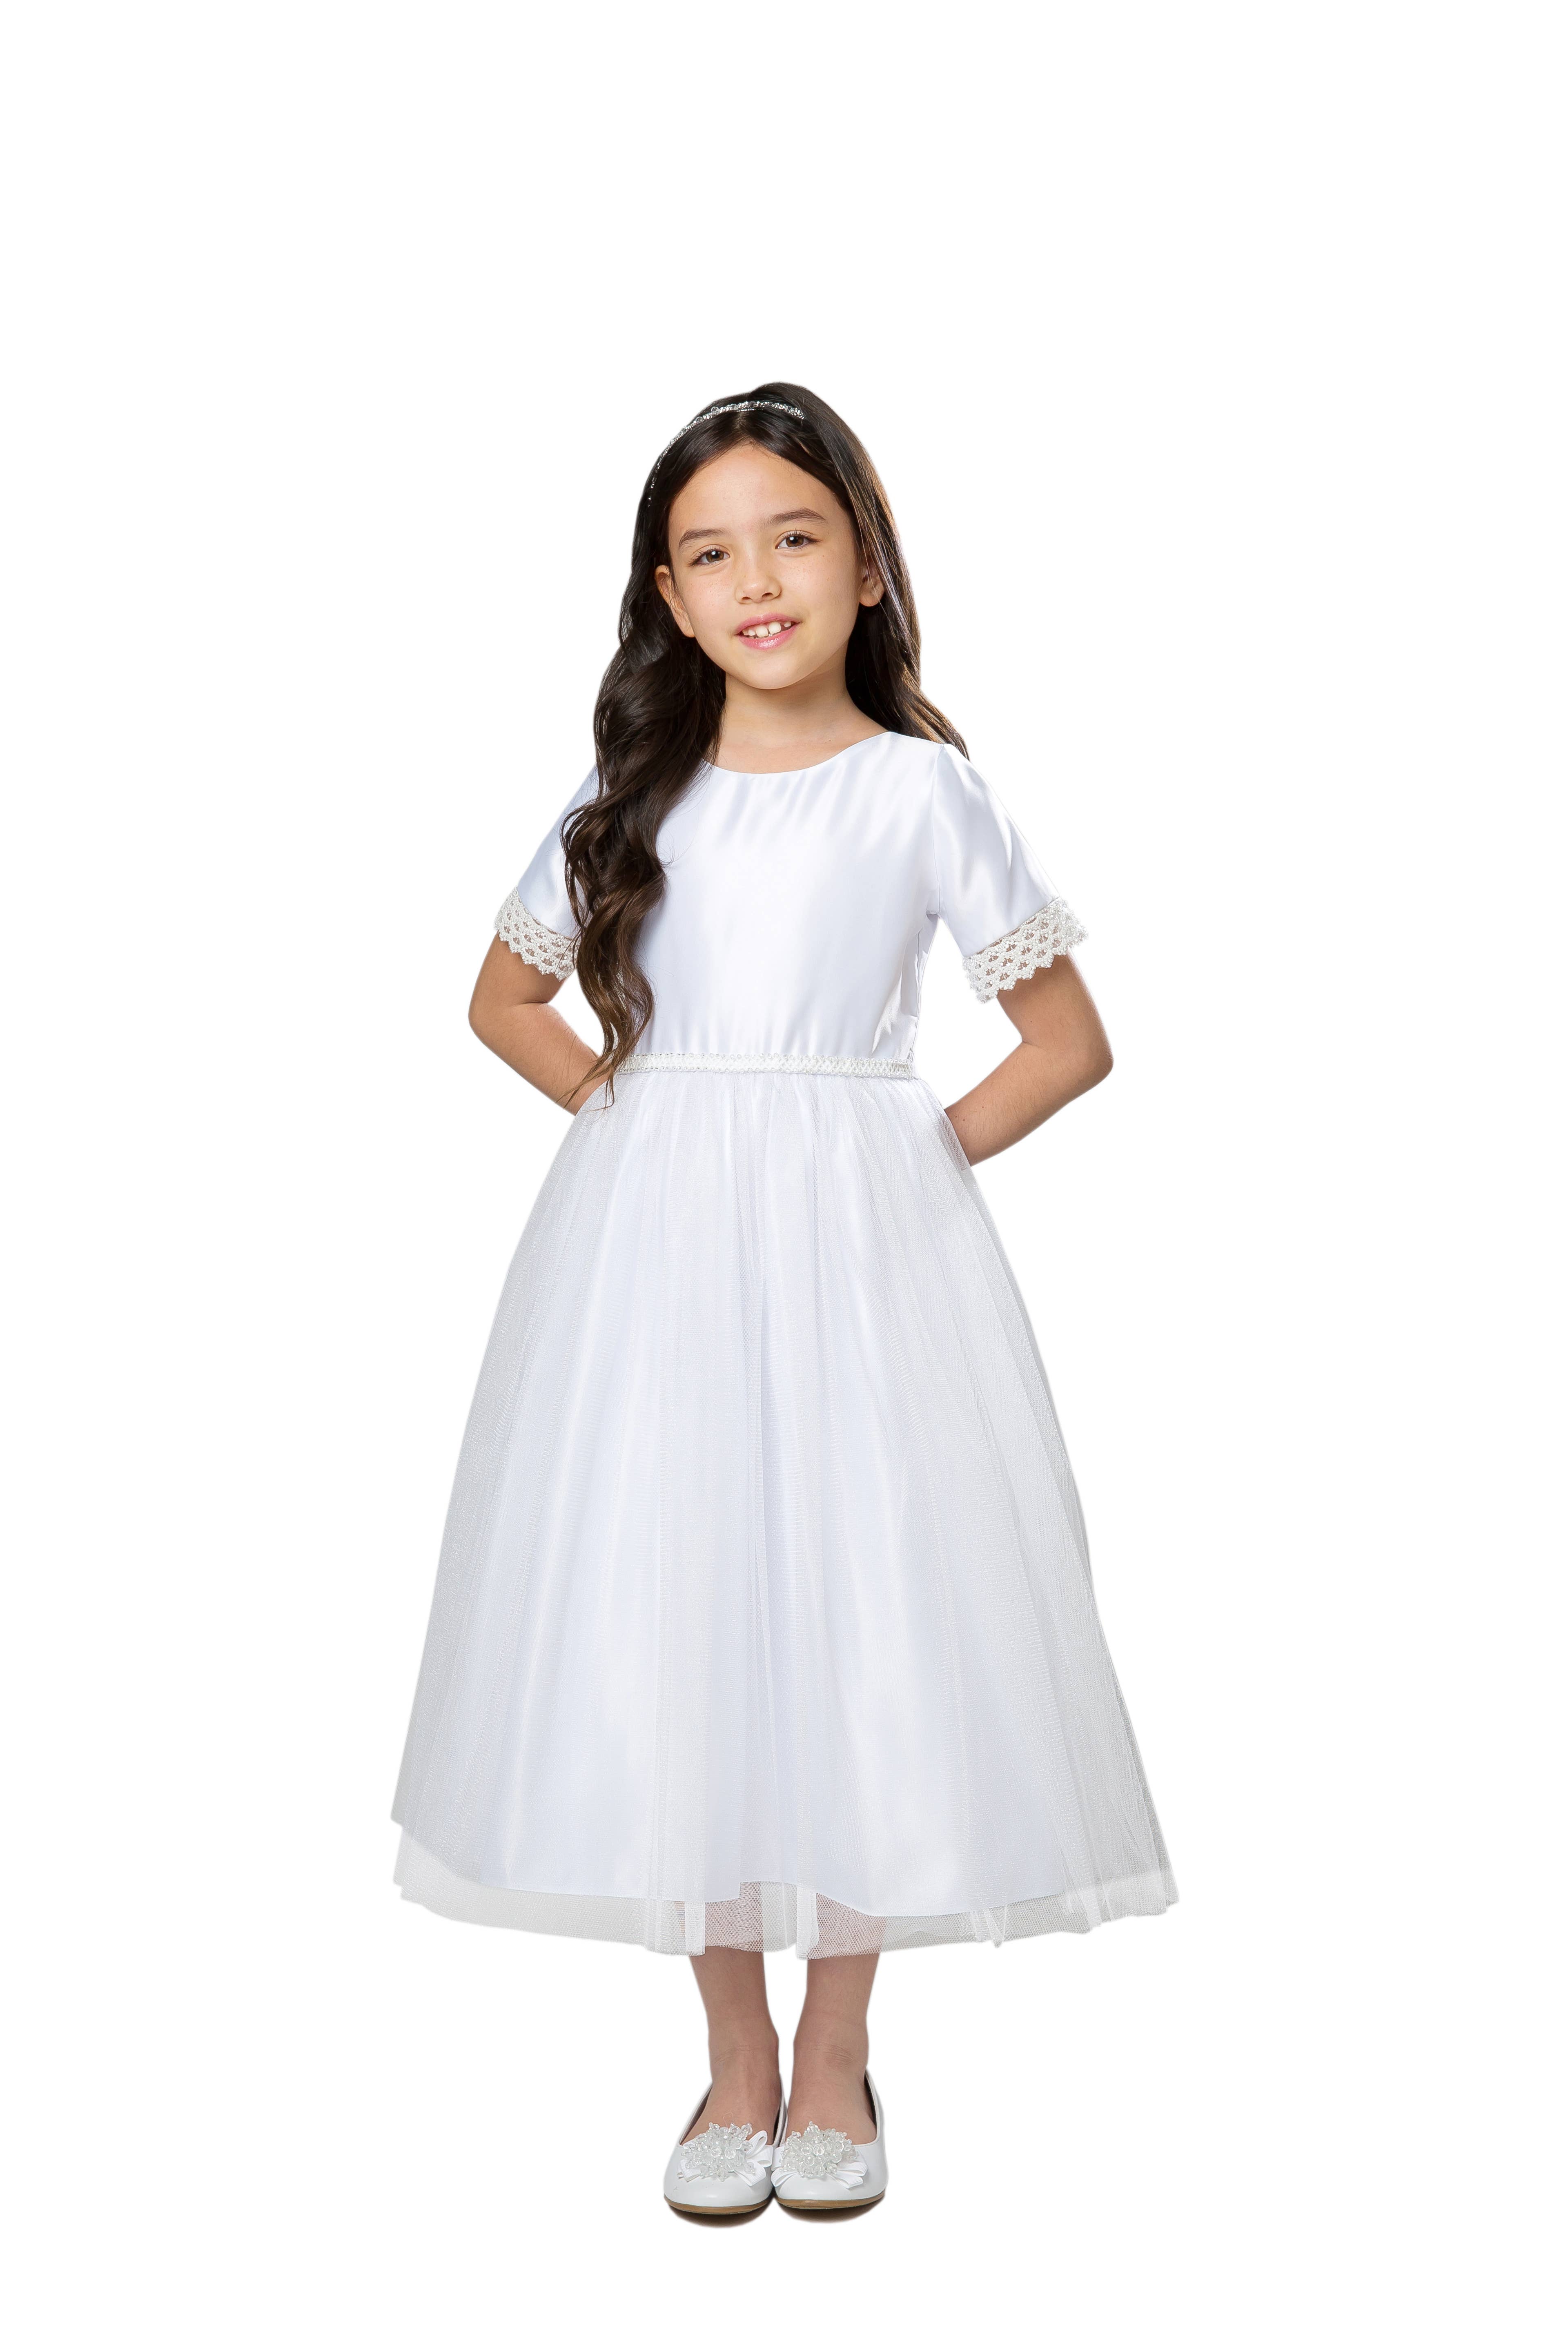 Sweet Kids, Inc. Wholesale Products | Buy with Free Returns on 